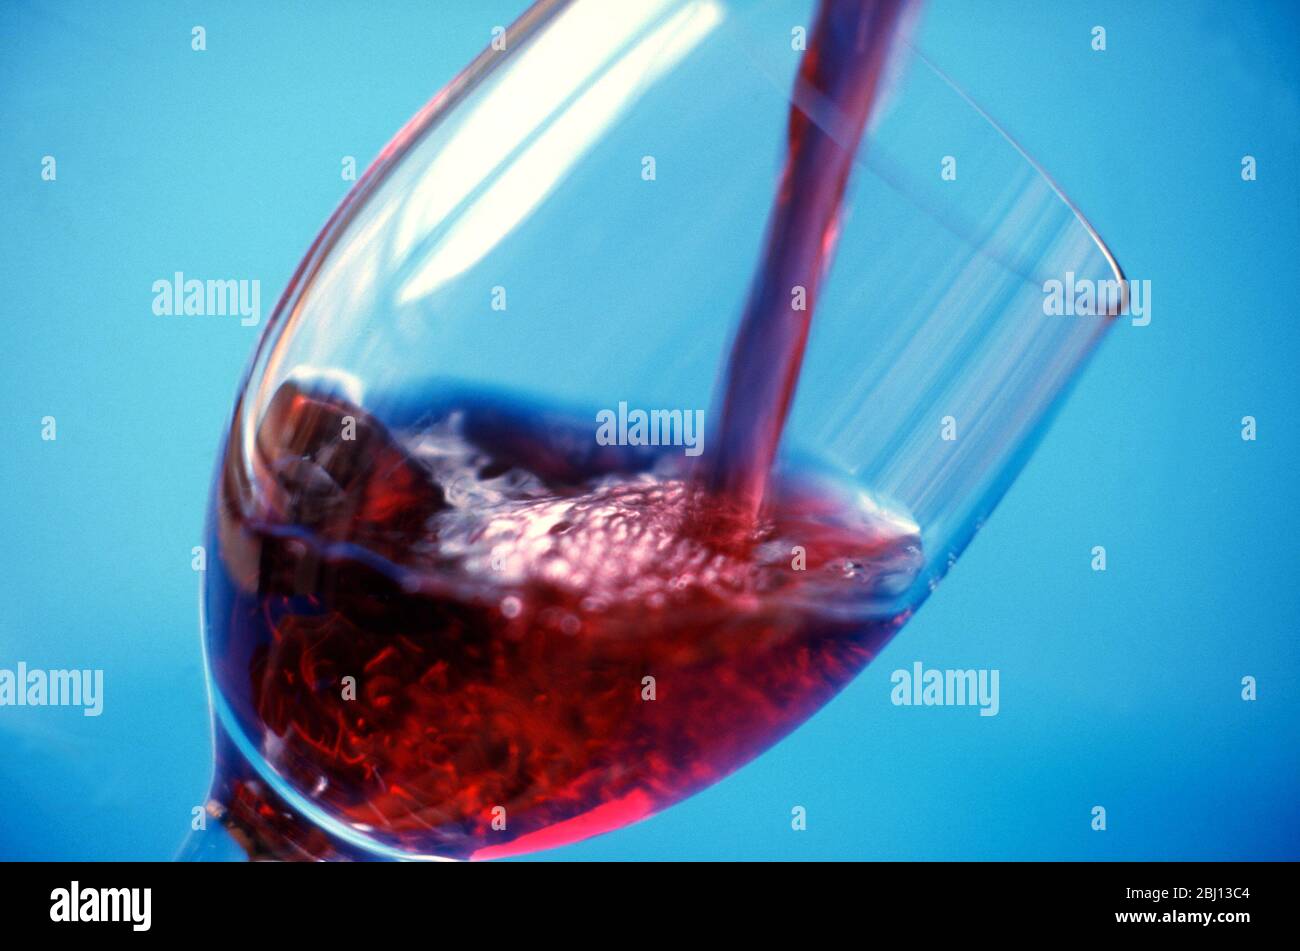 Pouring red wine - Stock Photo